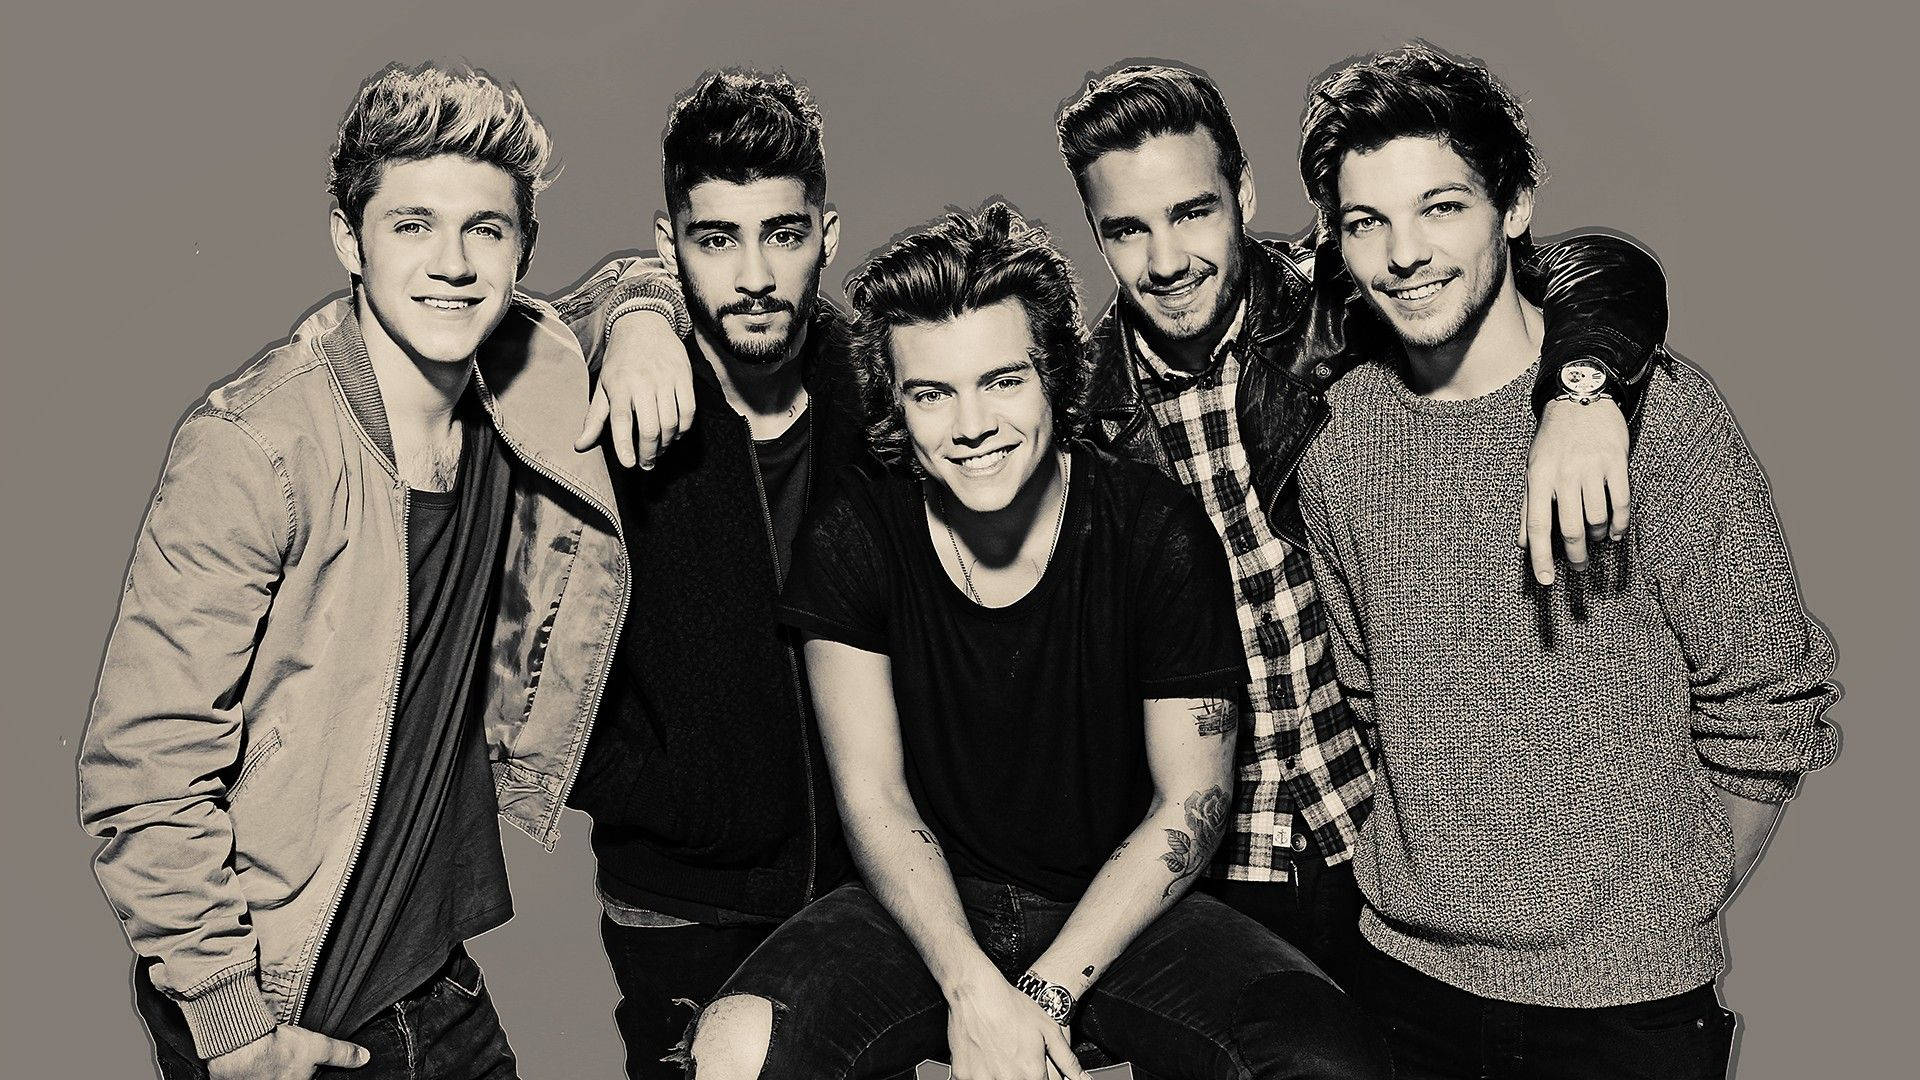 Image  5 members of One Direction pose for the band's iconic greyscale photo Wallpaper